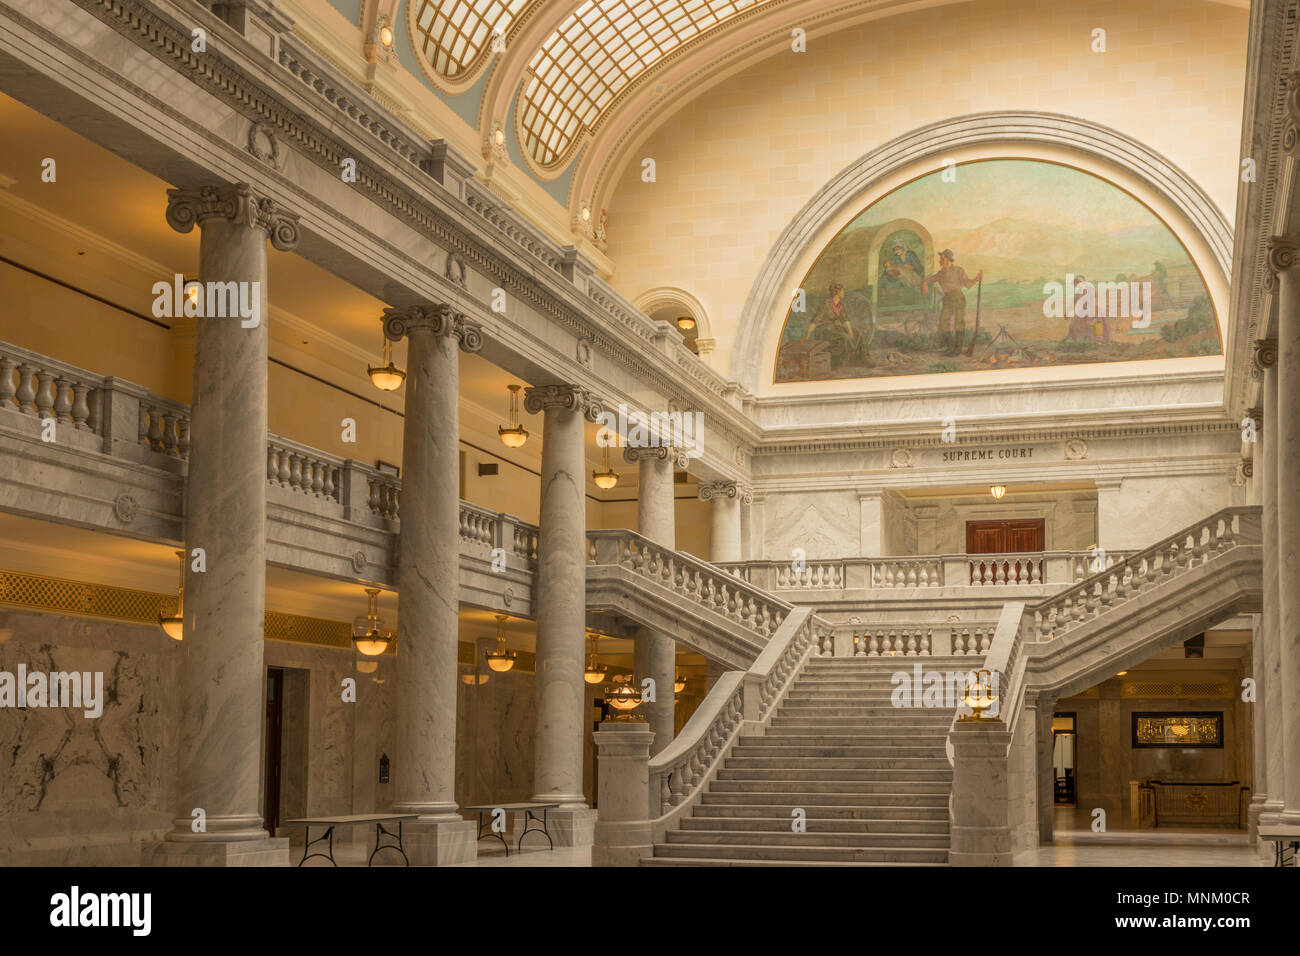 Salt Lake City, Utah, USA - May 3, 2018: Interior view of the State Capital Building and Supreme Court with mural, marble columns and staircase. Stock Photo